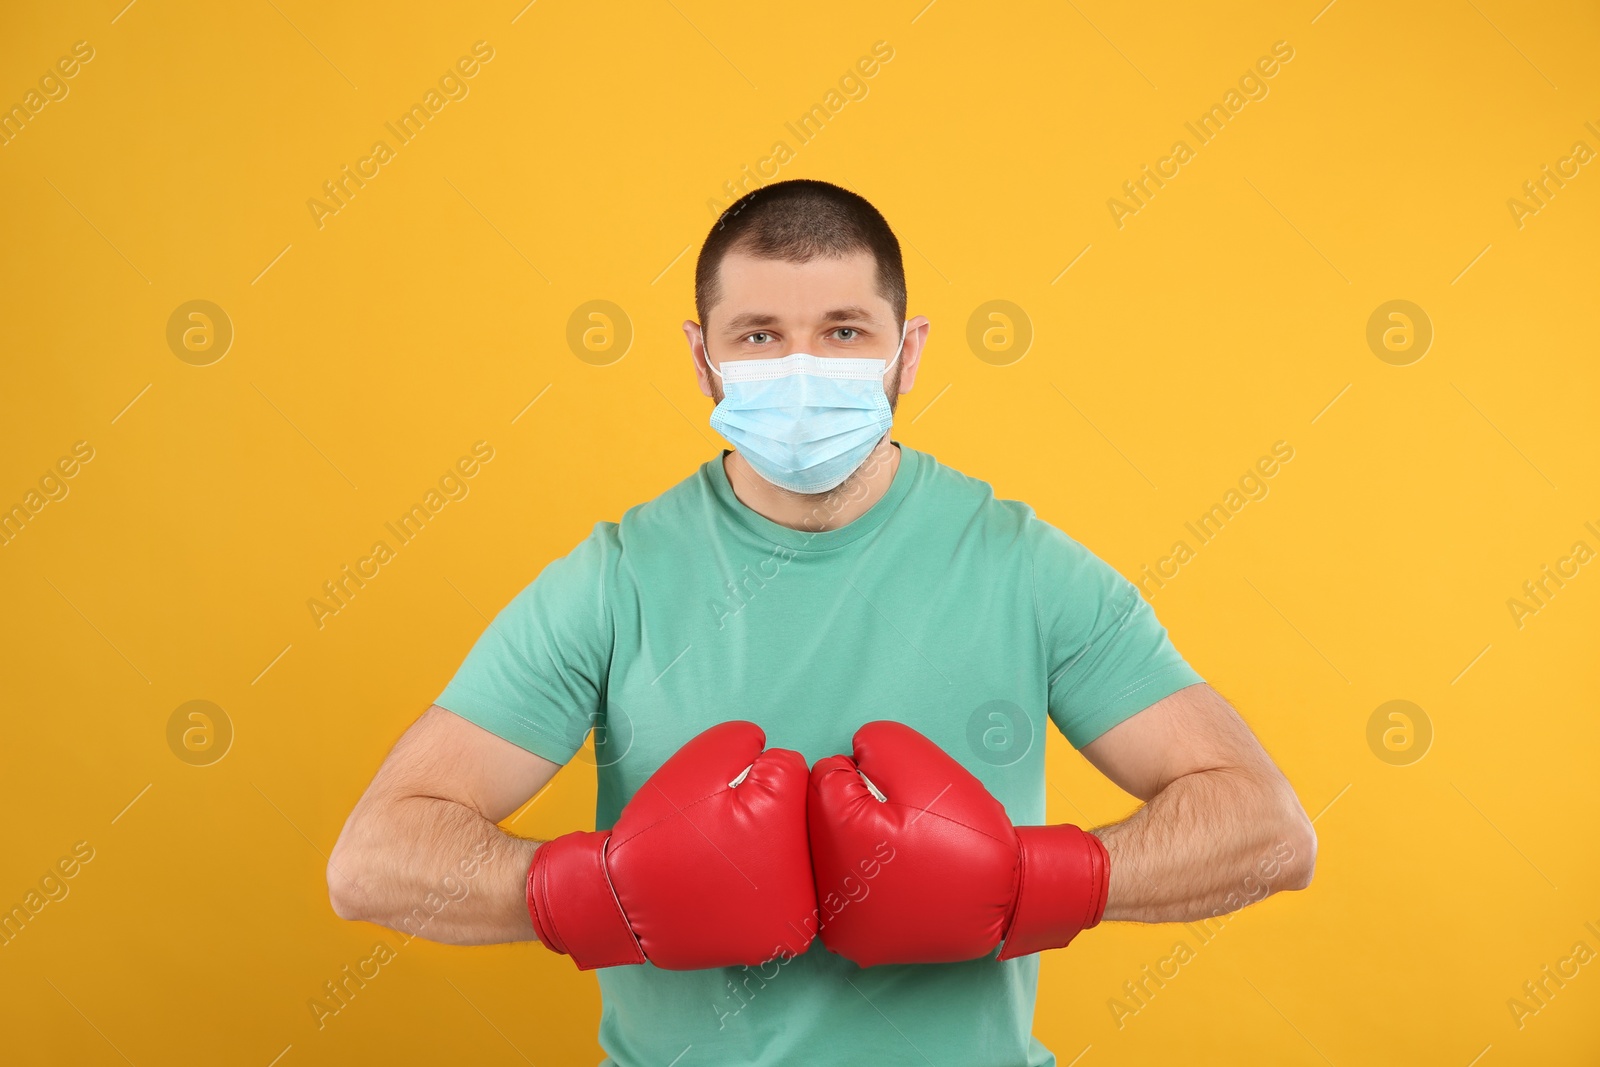 Photo of Man with protective mask and boxing gloves on yellow background. Strong immunity concept